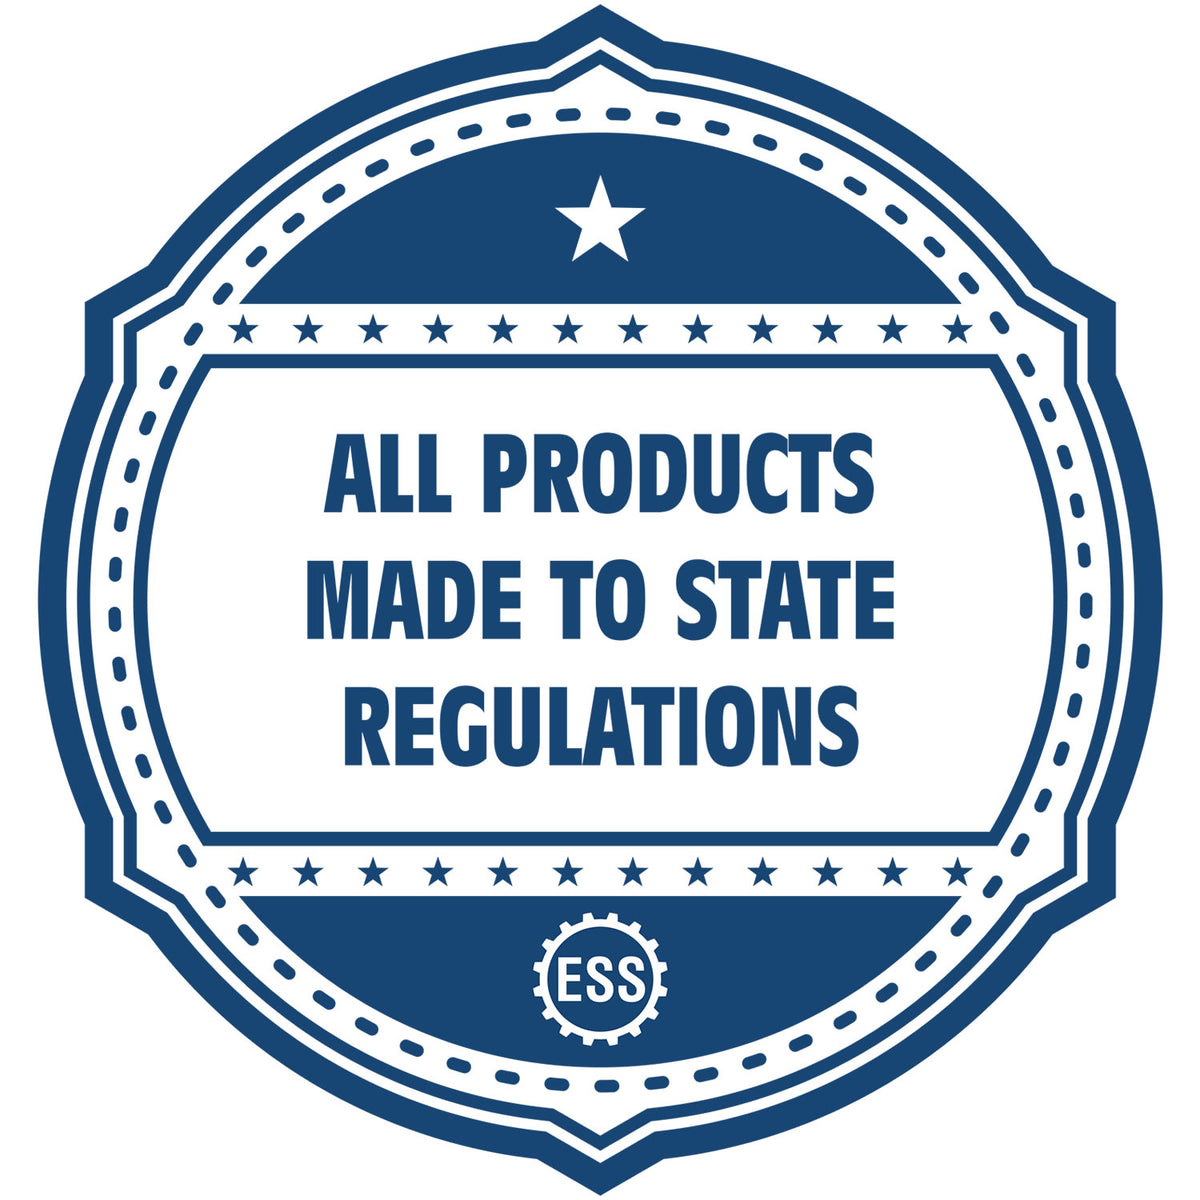 An icon or badge element for the Slim Pre-Inked Montana Landscape Architect Seal Stamp showing that this product is made in compliance with state regulations.